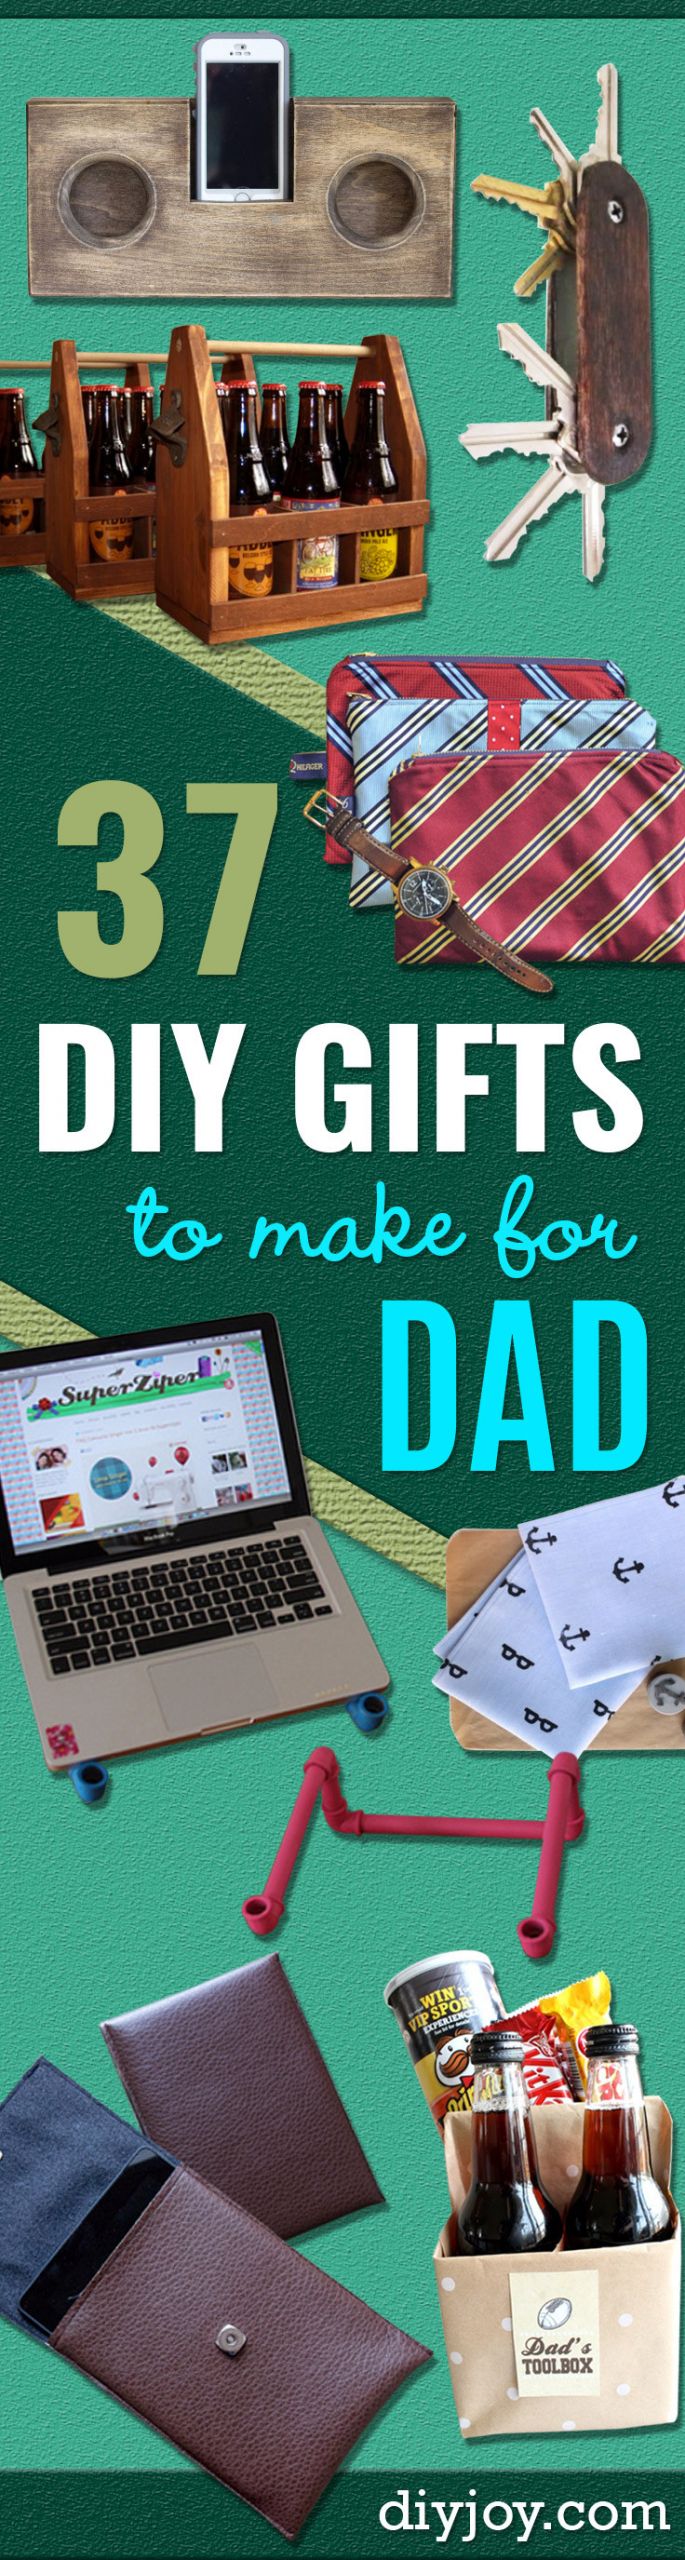 DIY Gift Ideas For Dads
 37 Awesome DIY Gifts to Make for Dad